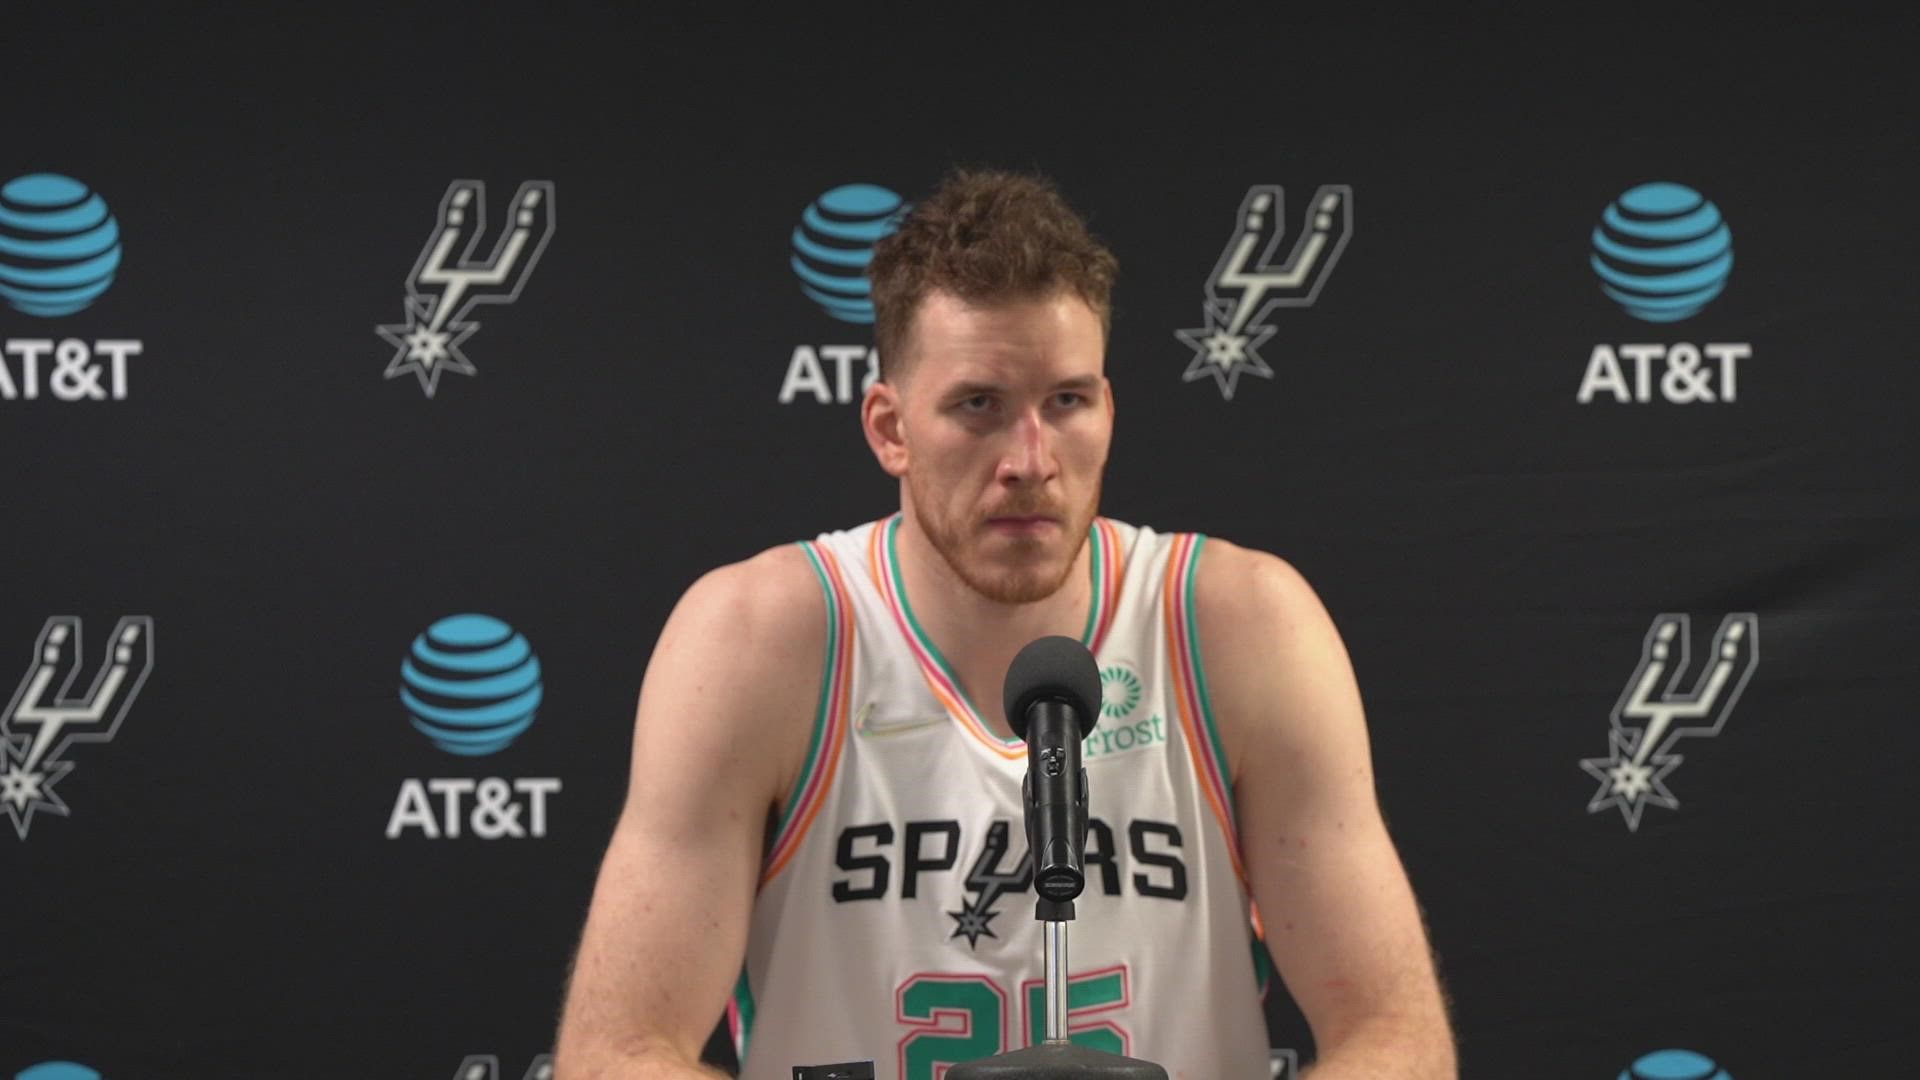 "We were just a couple plays short on the offensive and defensive end," Poeltl said. "We did a great job of fighting that game. Just one play here, one play there."